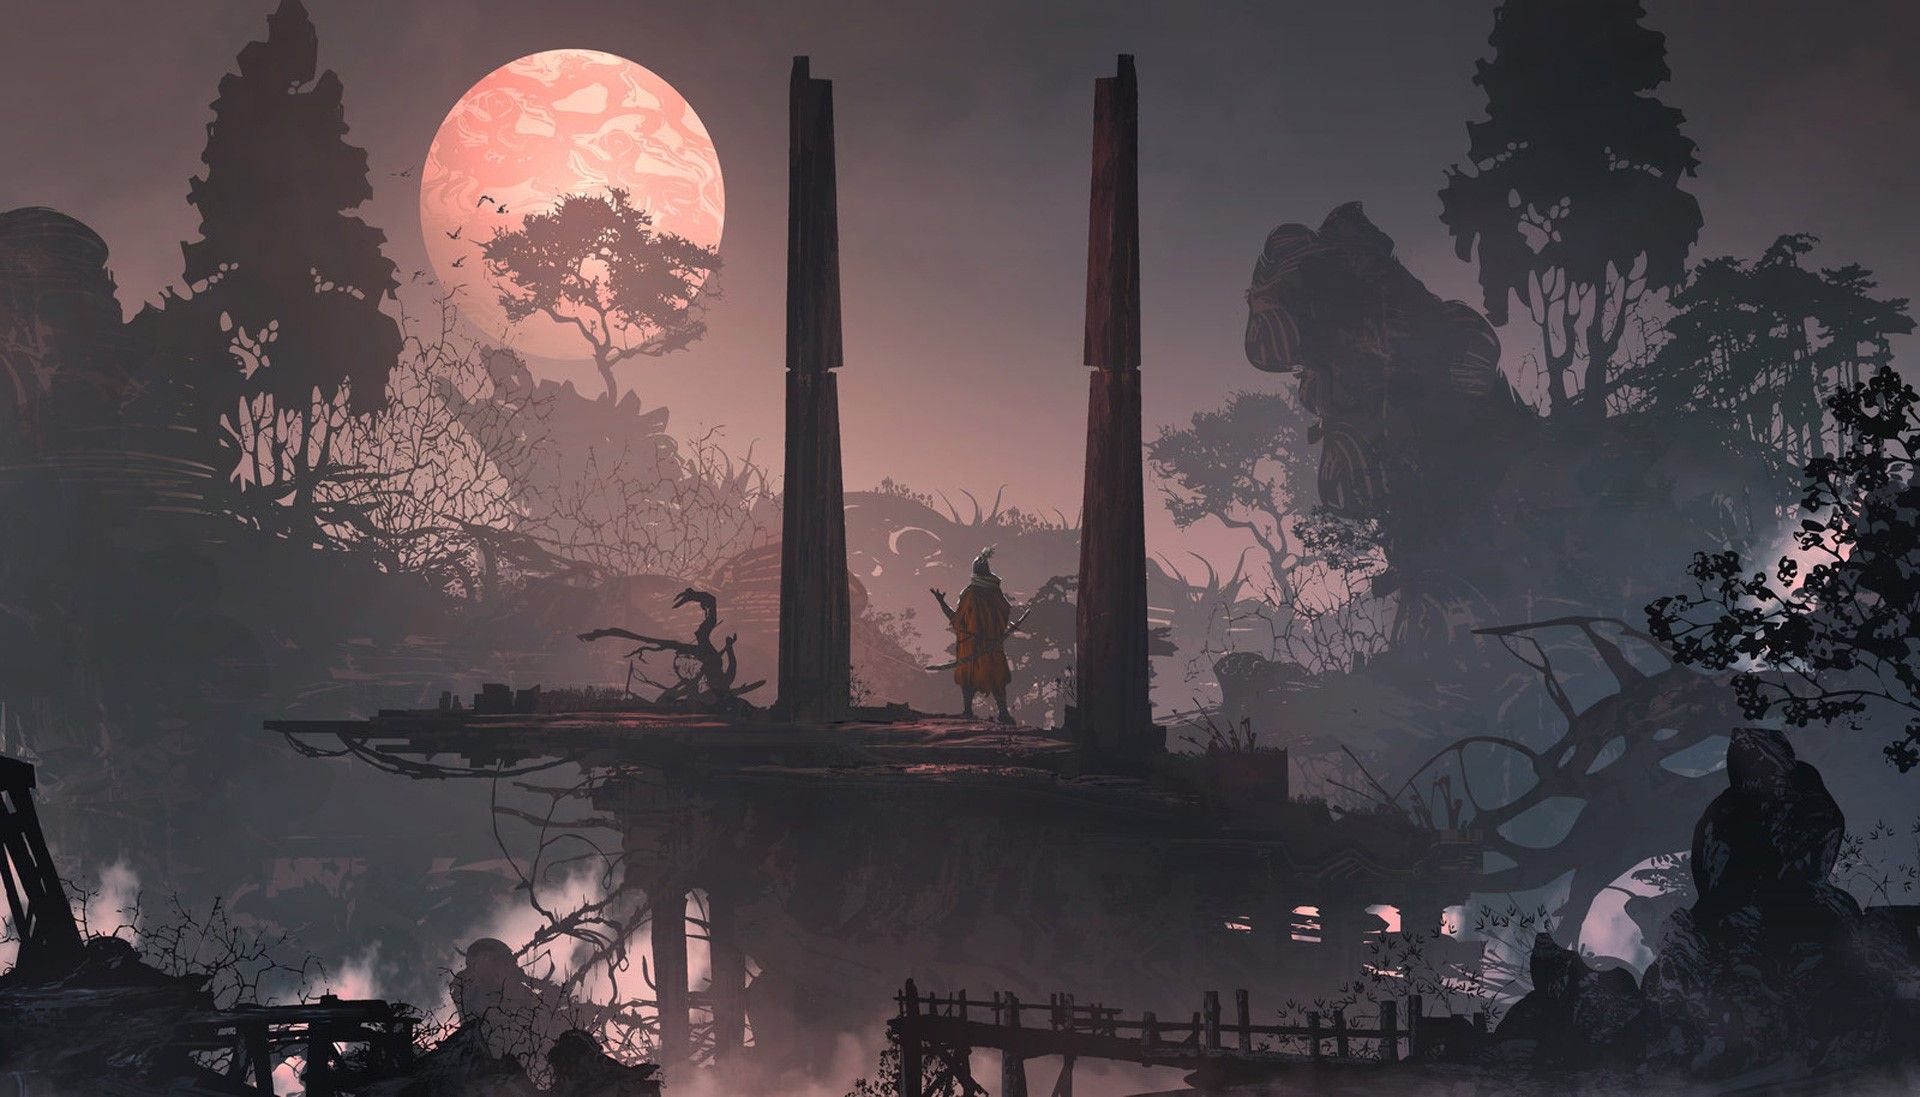 A character stands on a broken bridge in a dark, misty forest, with a giant moon in the sky. - Samurai